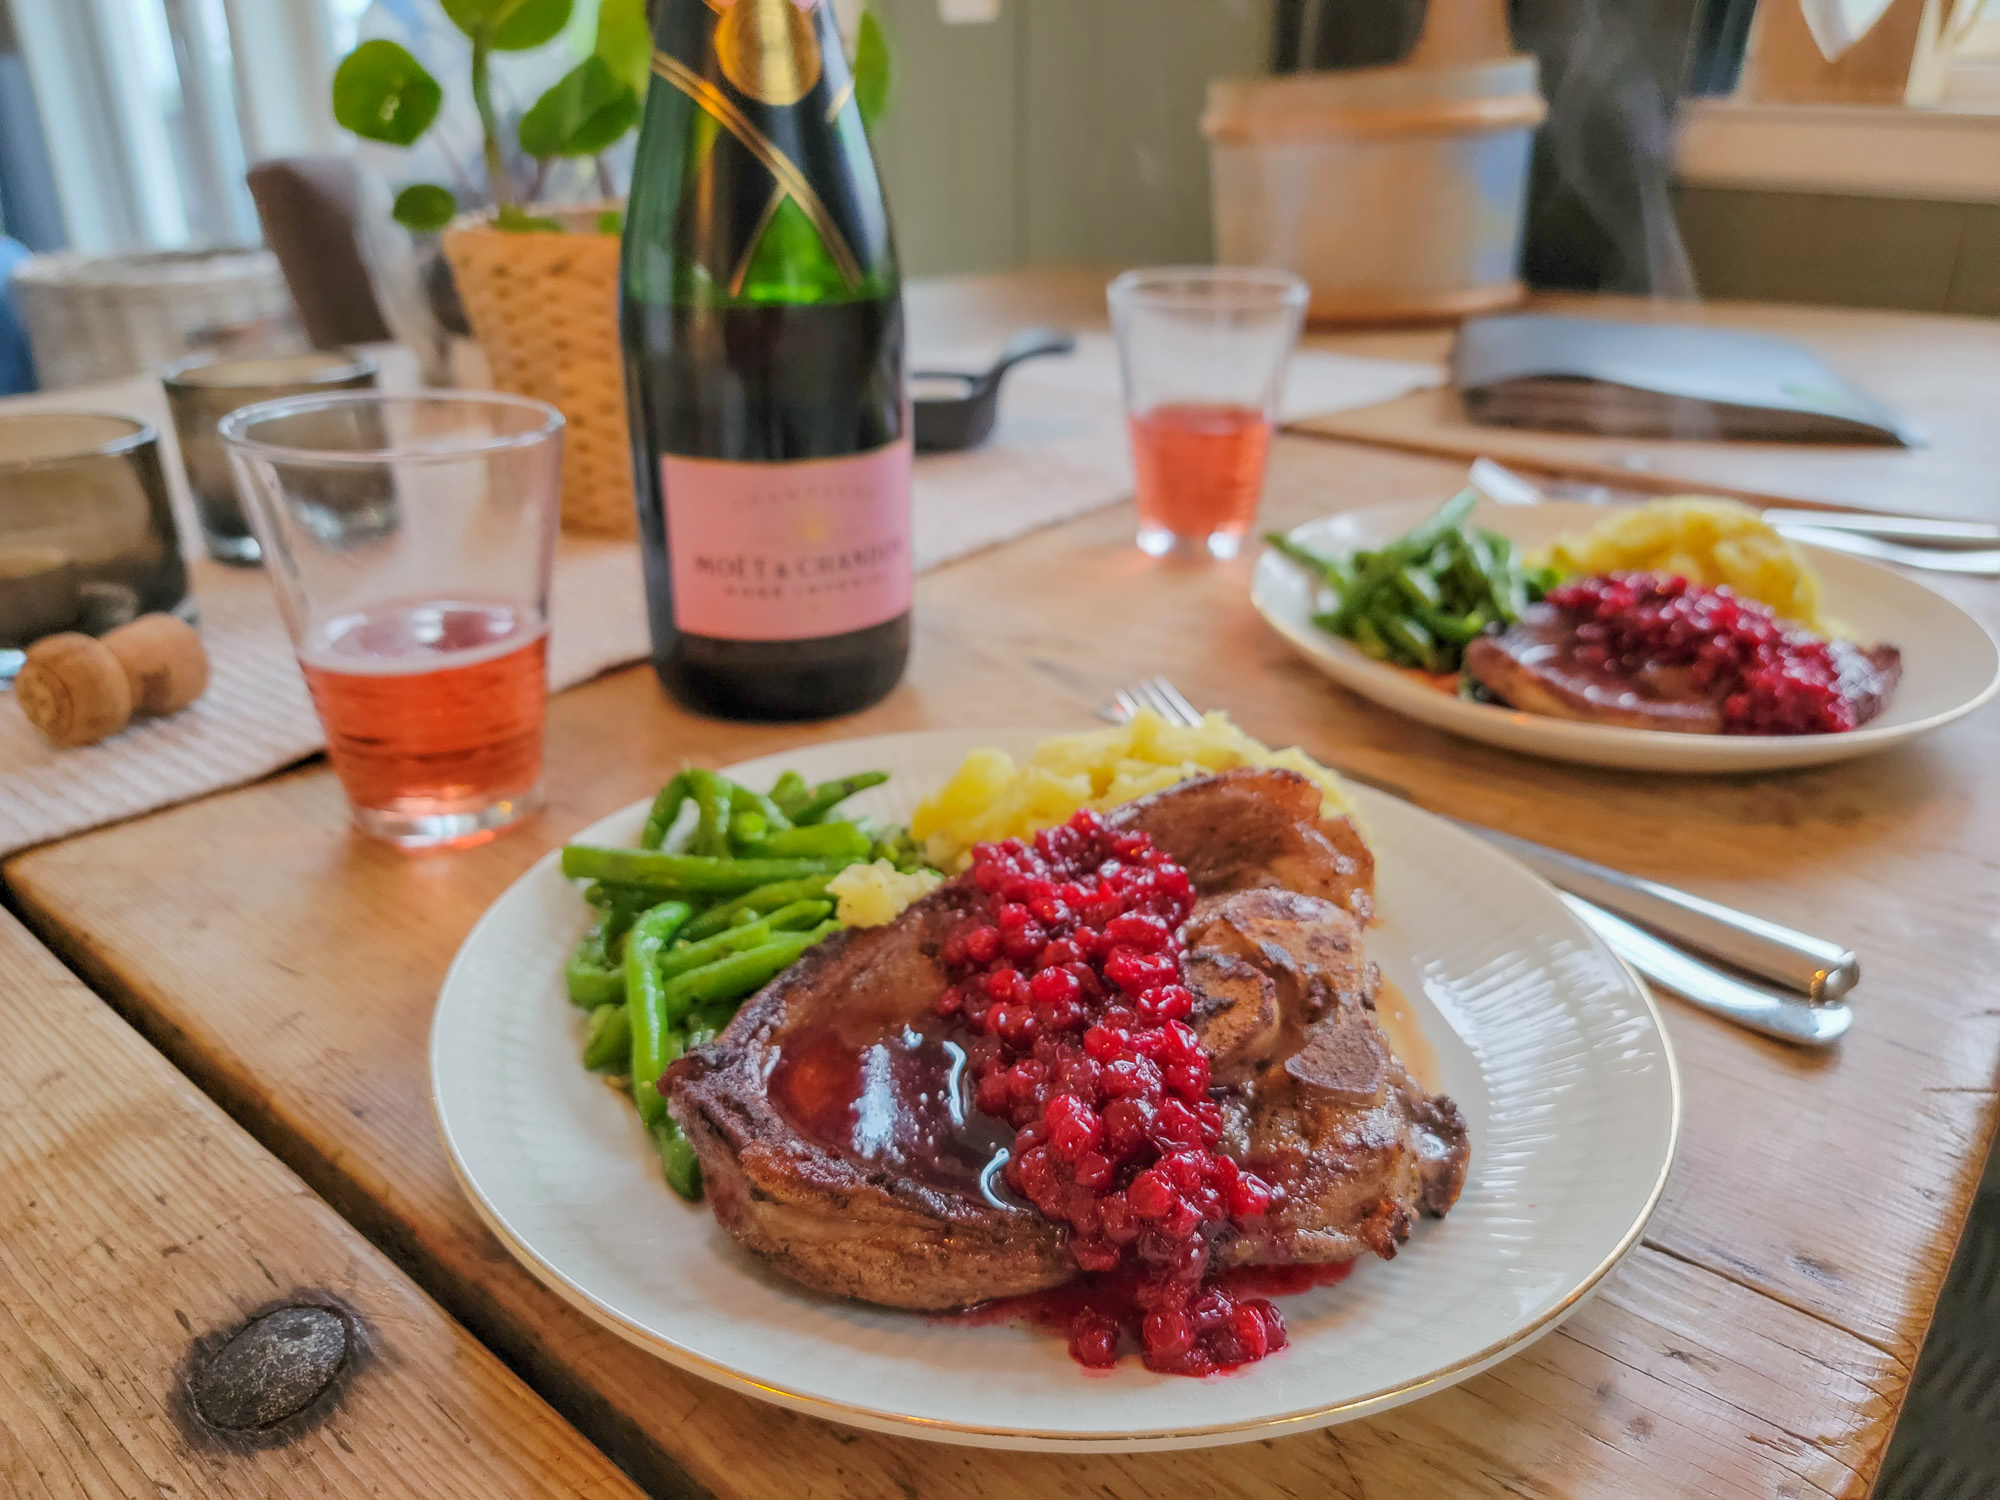 Rose Champagne Food Pairing - Lamb Chop with Lingonberry